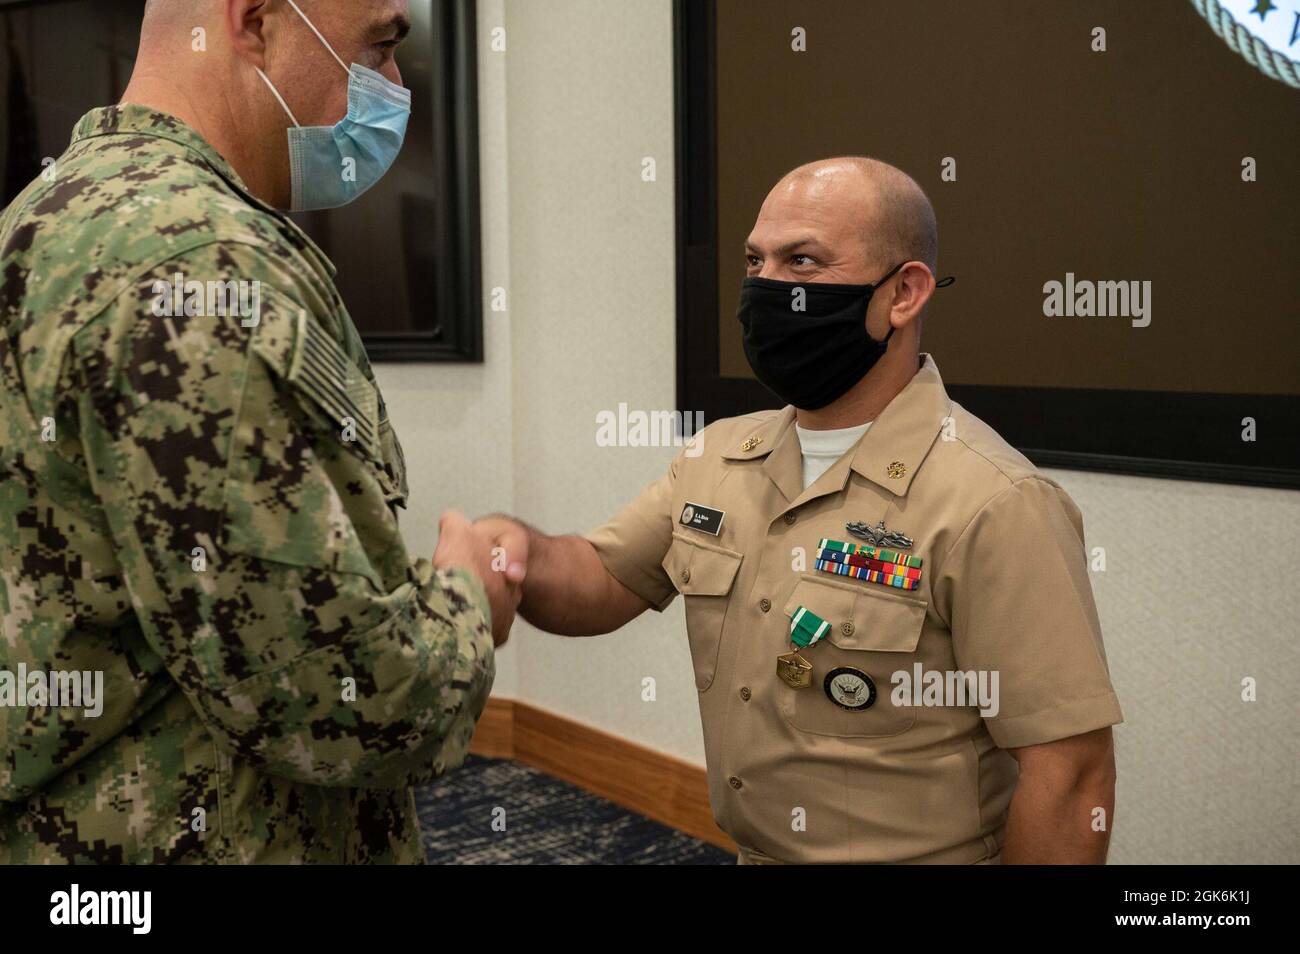 WASHINGTON, DC (Aug. 16, 2021) – Capt. Mark Burns (left), Naval Support Activity Washington commanding officer, presents Chief Navy Counselor Eduardo Rivera (right) with a Navy and Marine Corps commendation medal during an award ceremony held onboard Washington Navy Yard. Stock Photo